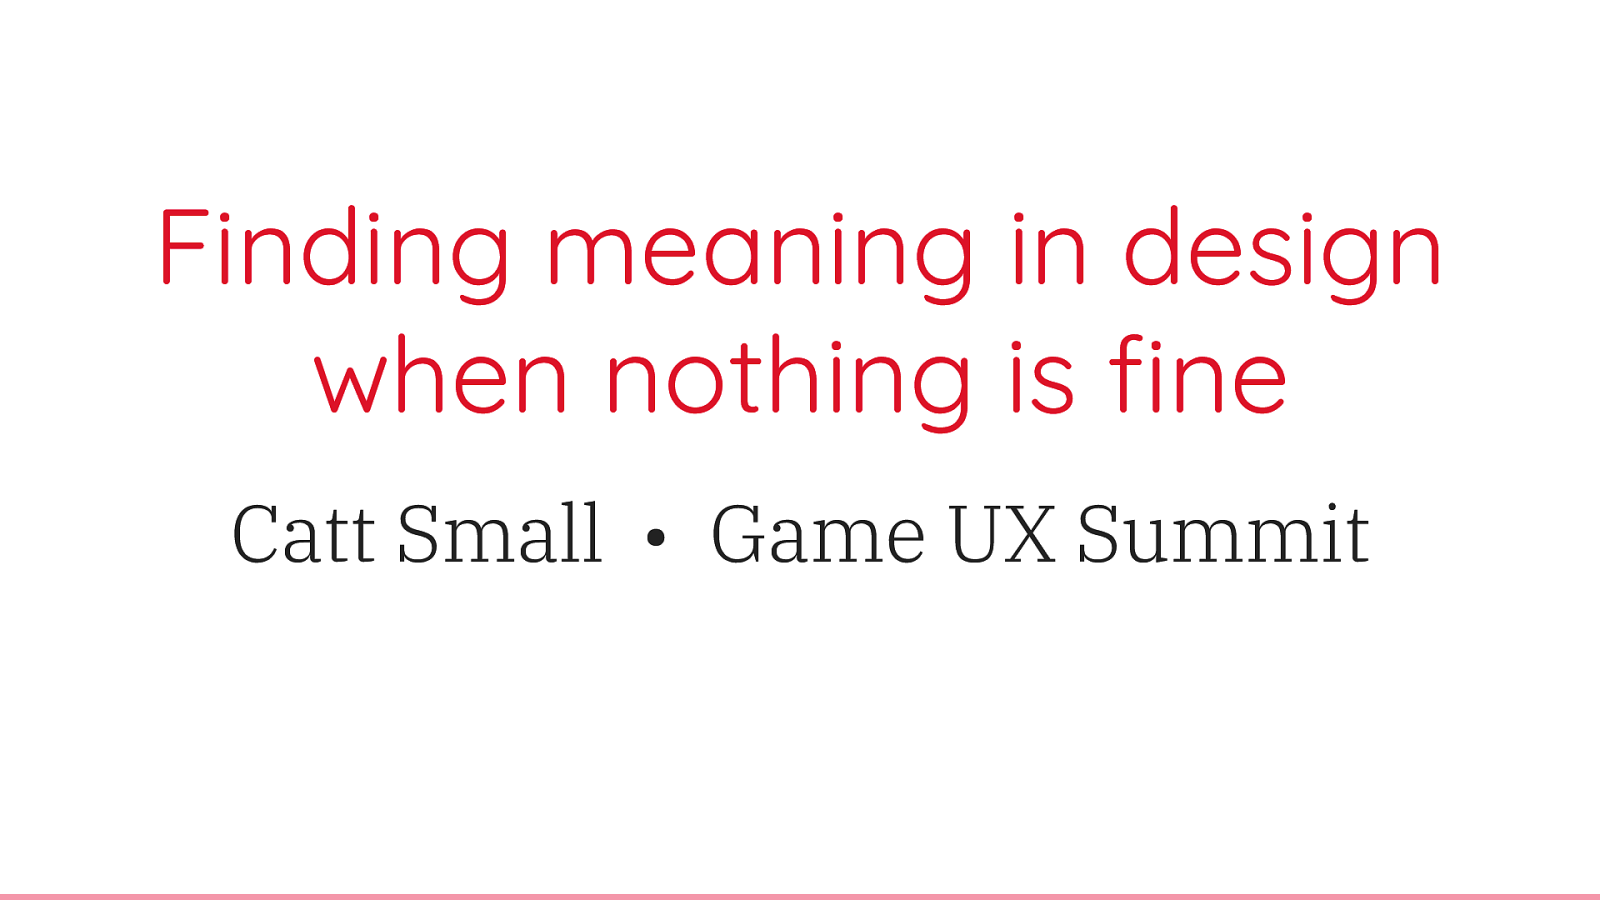 Finding meaning in design when nothing is fine